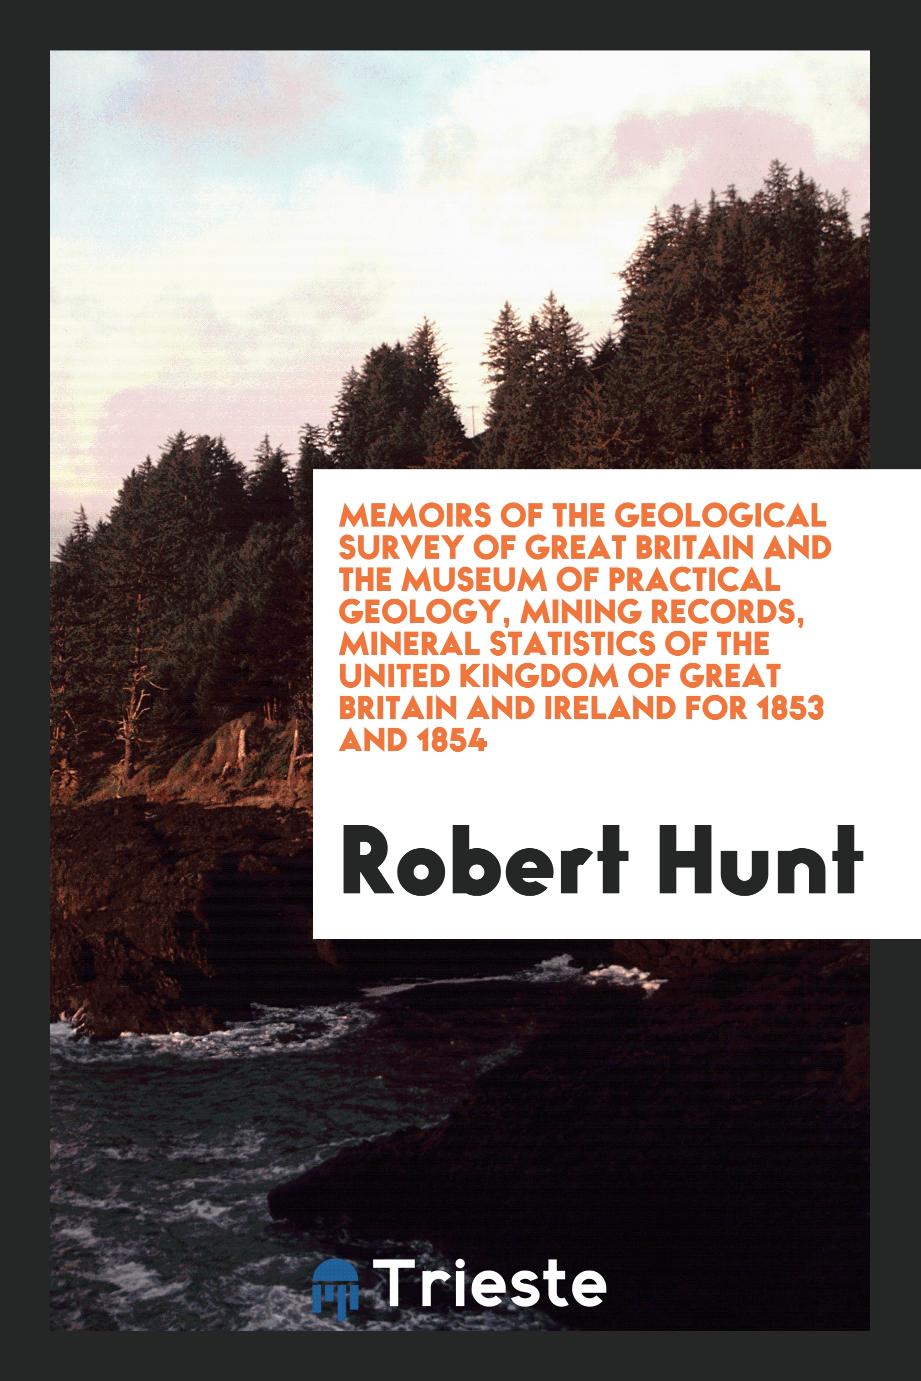 Memoirs of the Geological Survey of Great Britain and the Museum of Practical Geology, Mining Records, Mineral Statistics of the United Kingdom of Great Britain and Ireland for 1853 and 1854